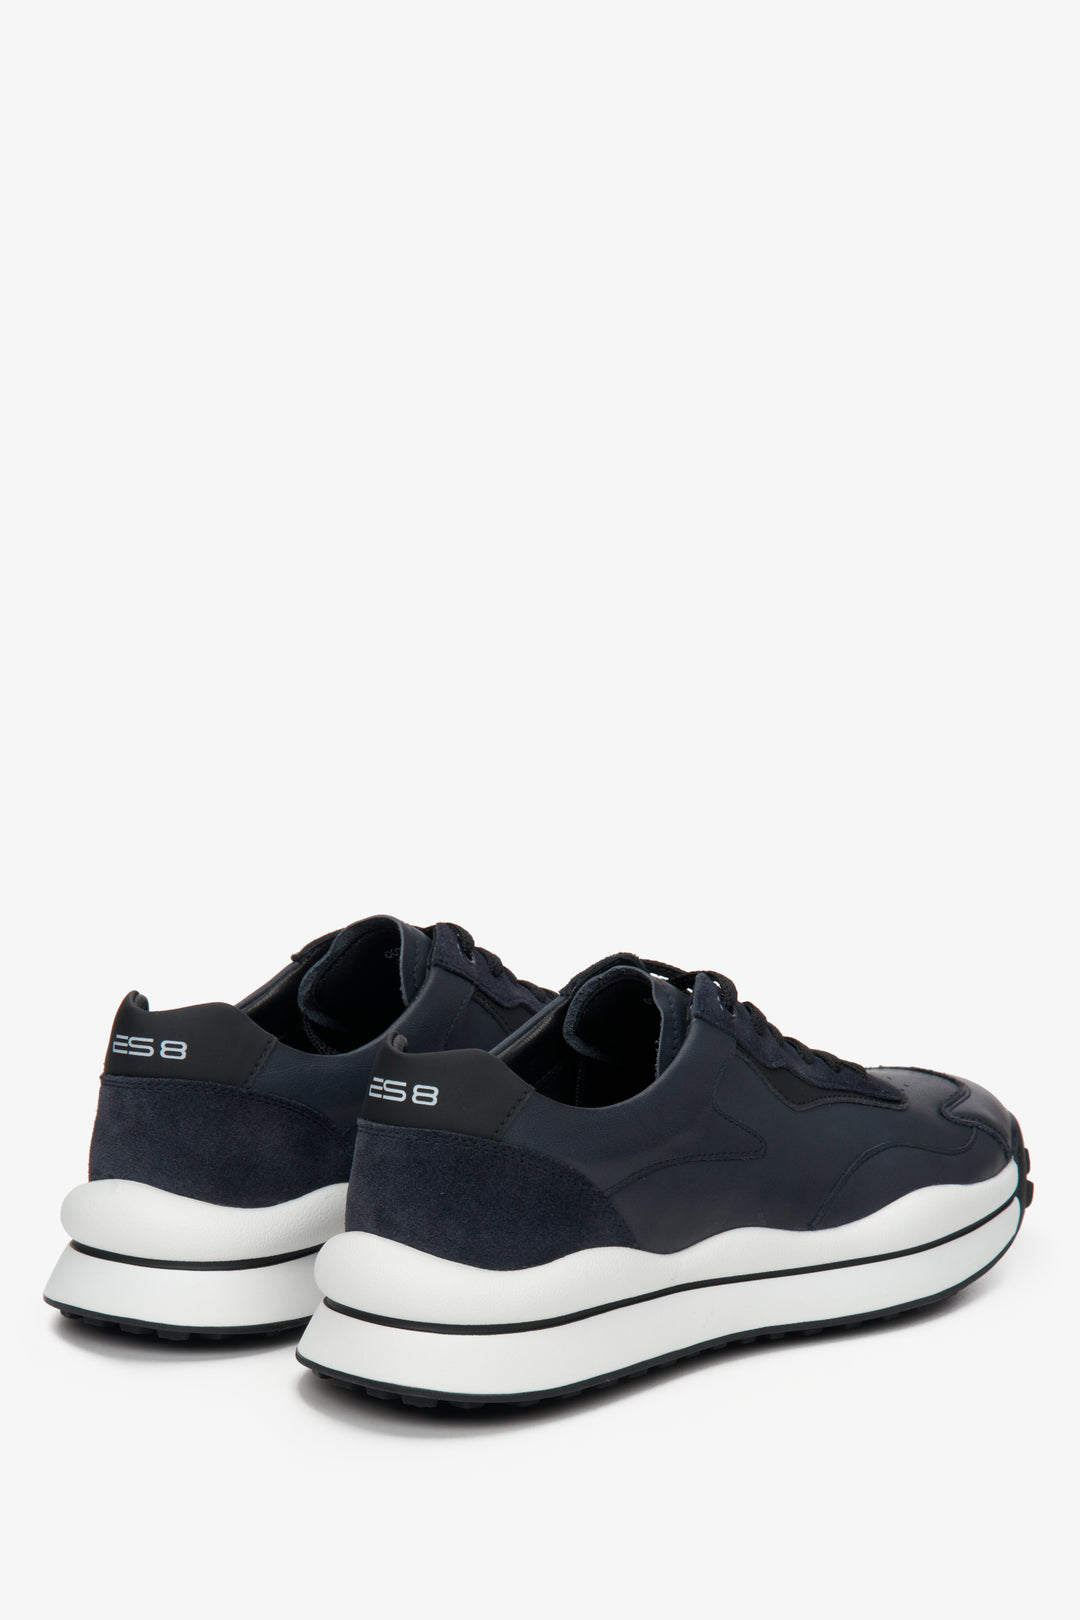 ES 8 navy blue and black sneakers for men for spring and autumn - close-up on the heel and side seam.